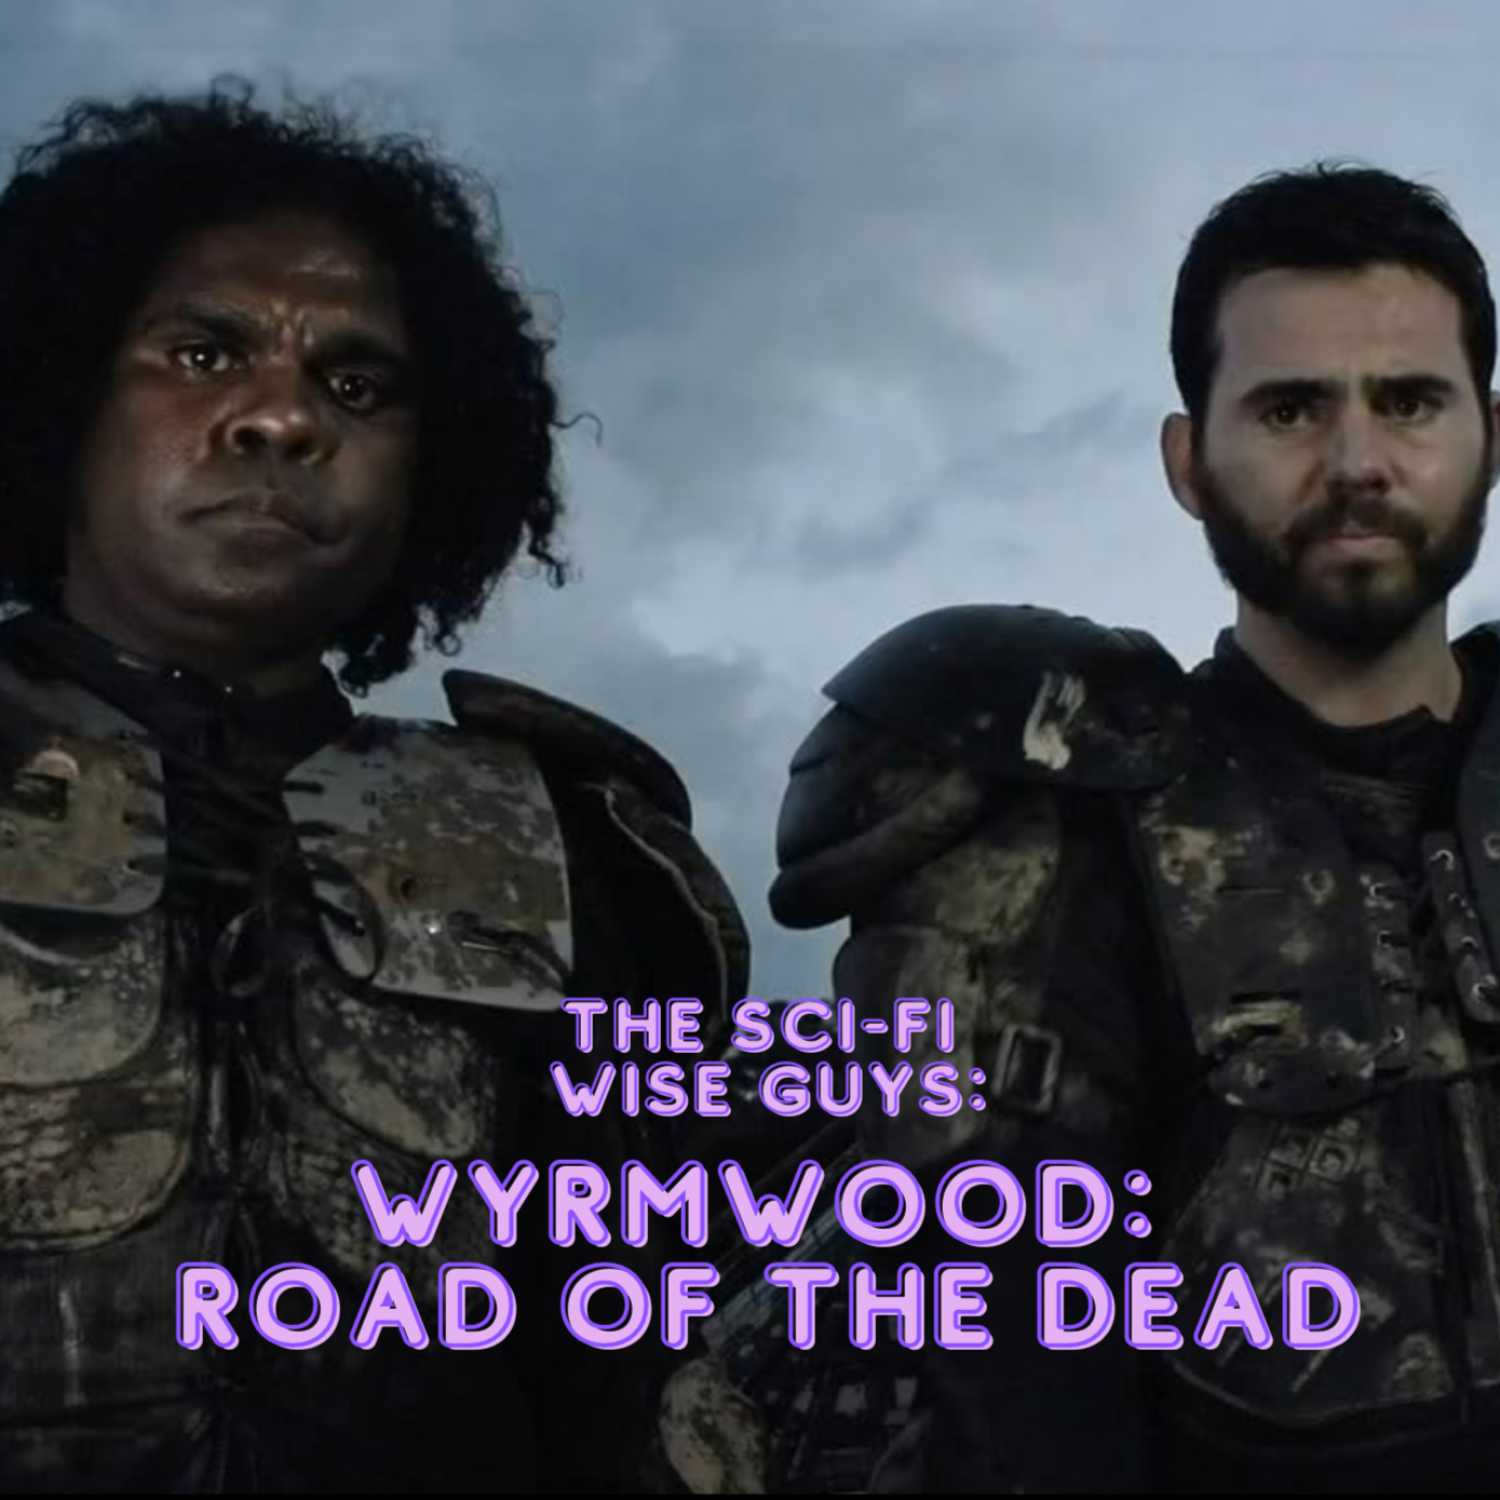 Happy Zombie Eve! (Wyrmwood: Road of the Dead)